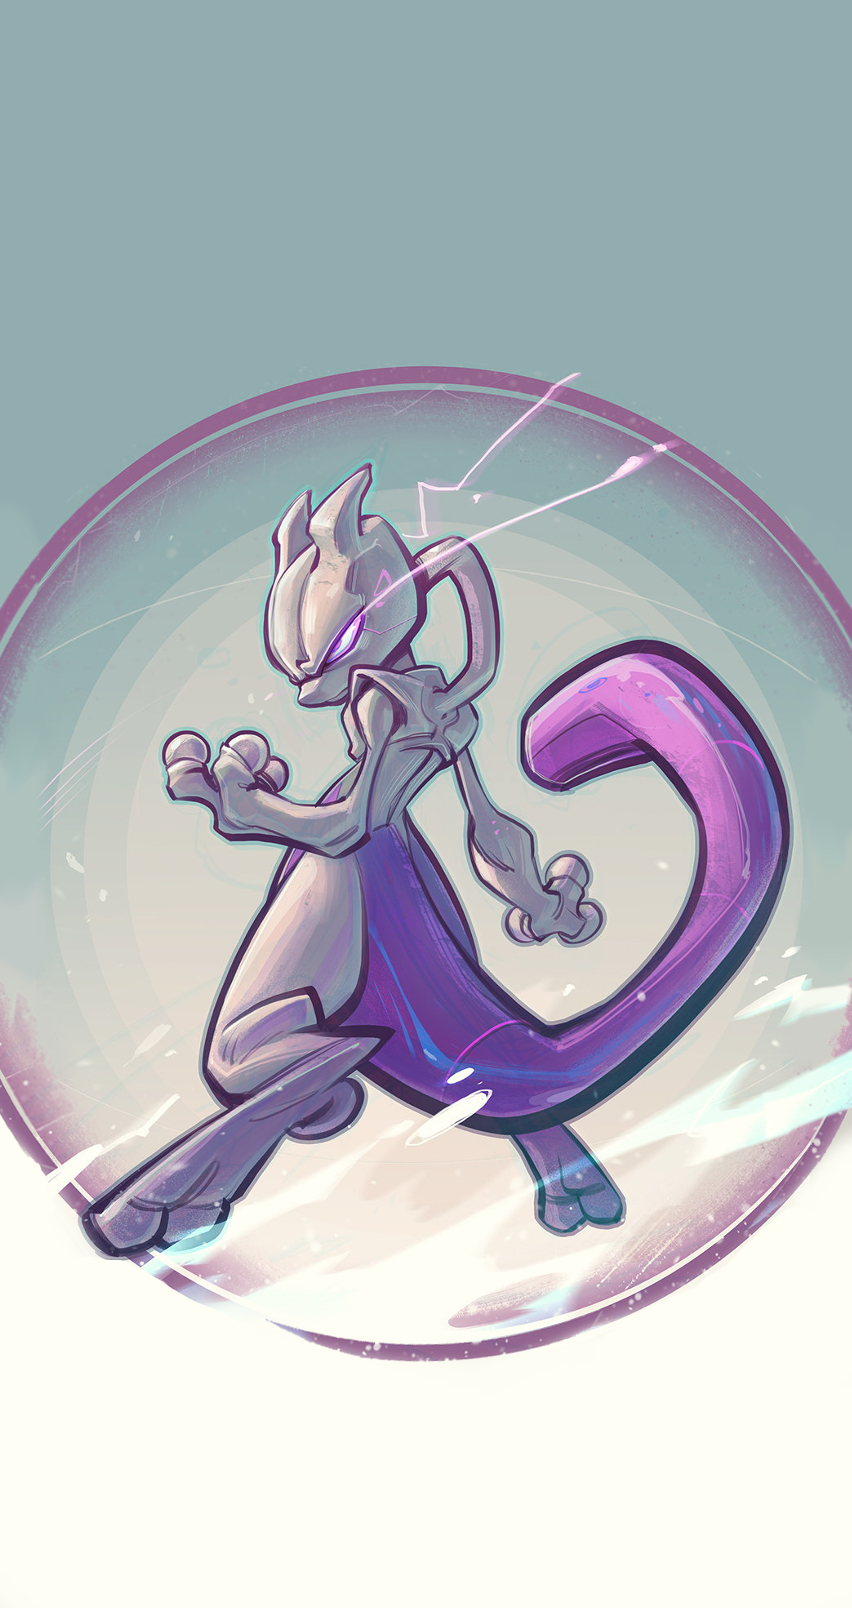 Mewtwo Iphone Wallpaper - Pokemon Mewtwo Wallpaper Iphone , HD Wallpaper & Backgrounds